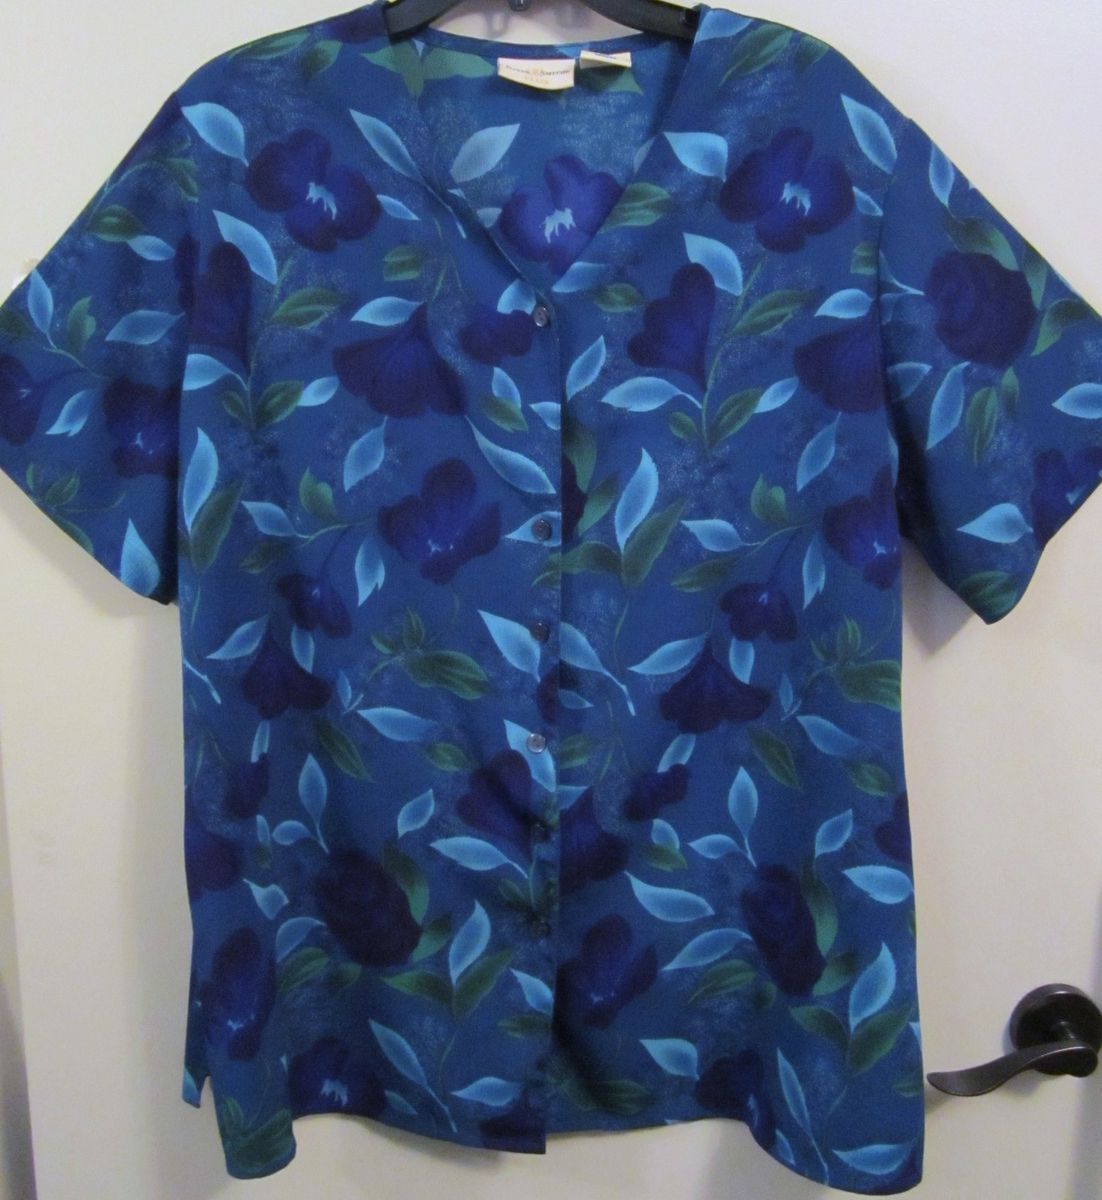 Jaclyn Smith Blue Floral Tunic Top Blouse Size 20W